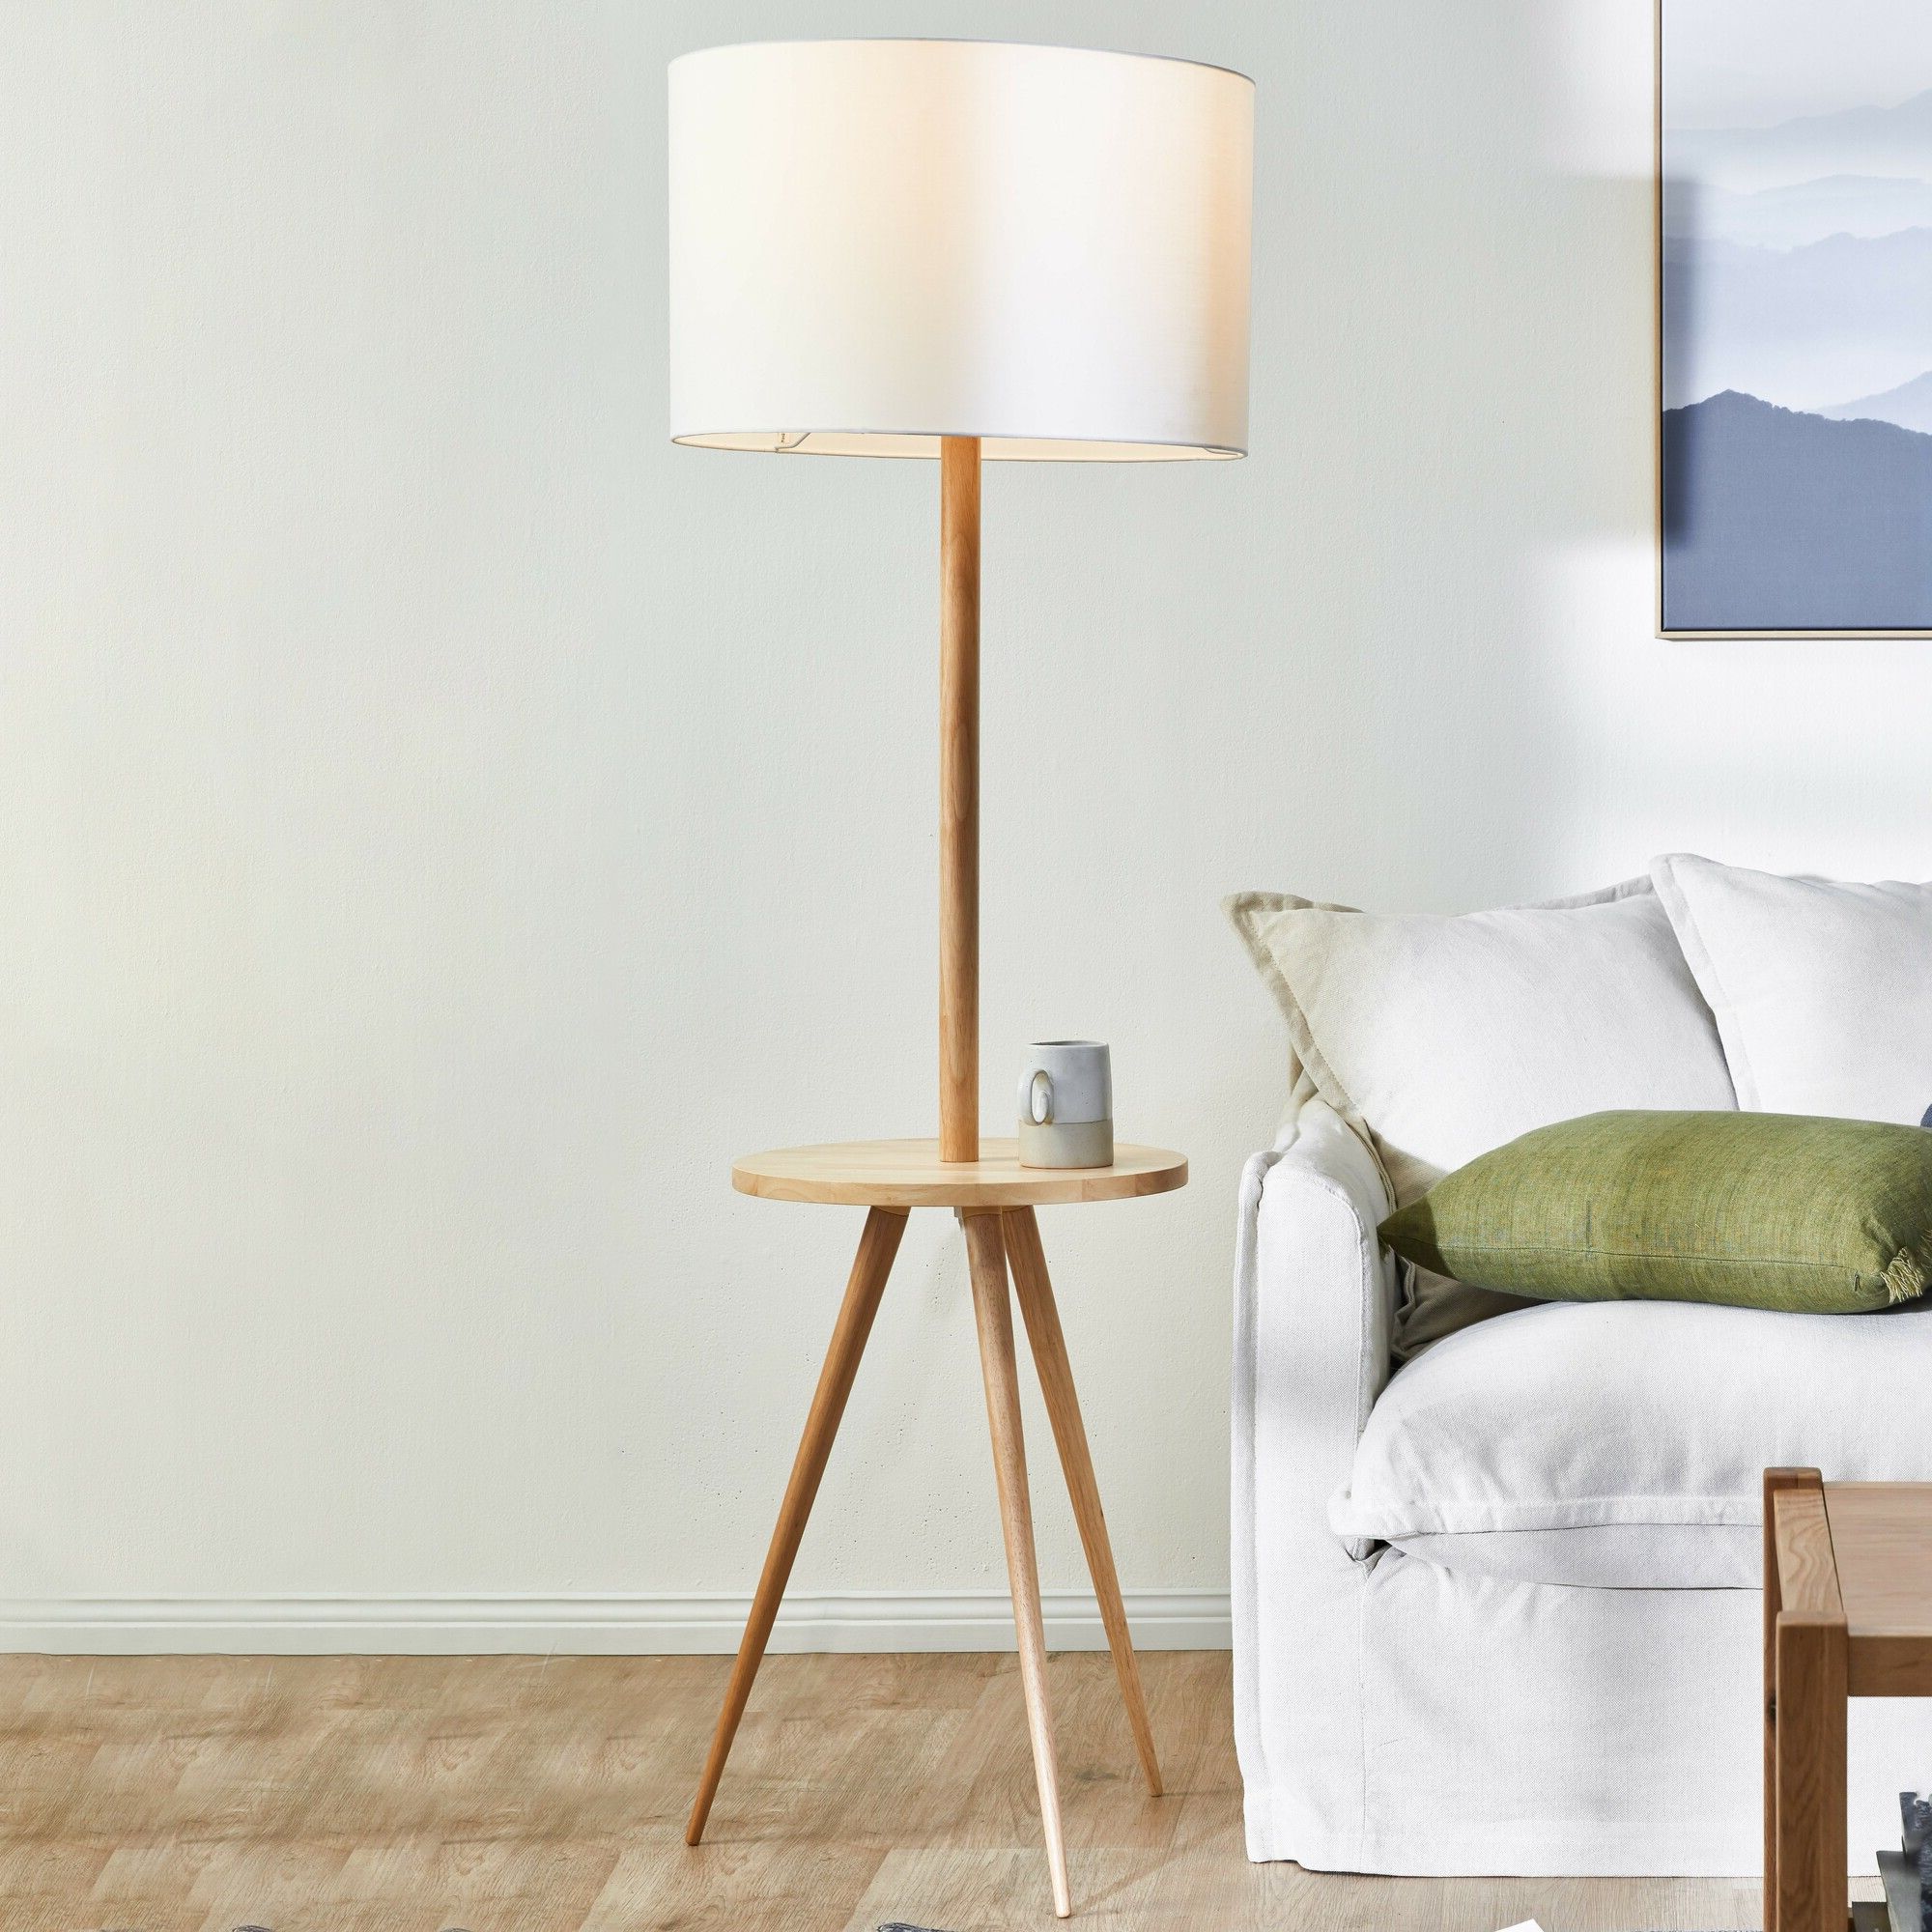 Temple & Webster Natural & White Wooden Floor Lamp Intended For Oak Floor Lamps (View 18 of 20)